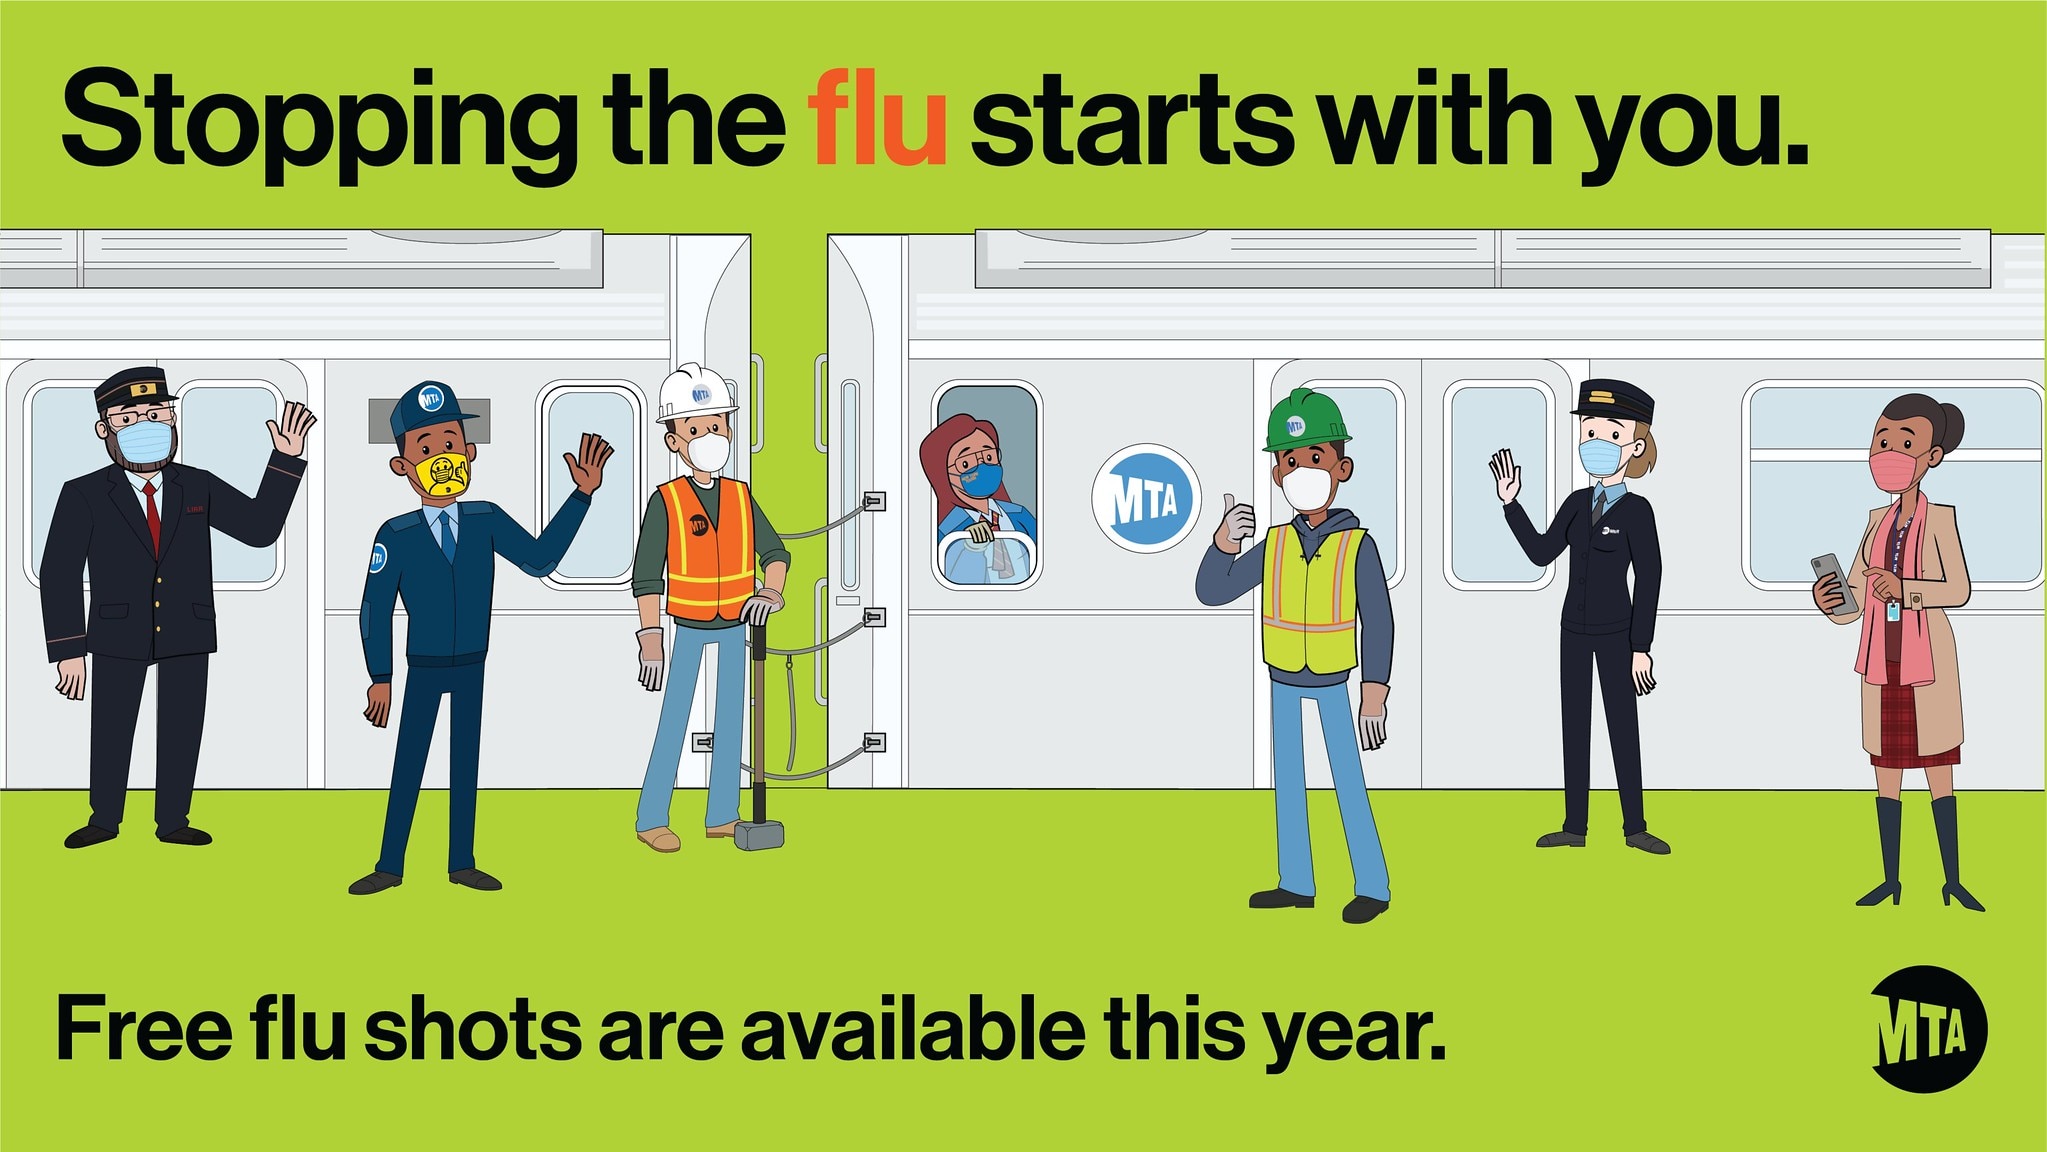 MTA Joins With Walgreens to Offer Free Flu Shots to All MTA Employees as Part of New 'Stop the Flu in Its Tracks' Public Health Campaign